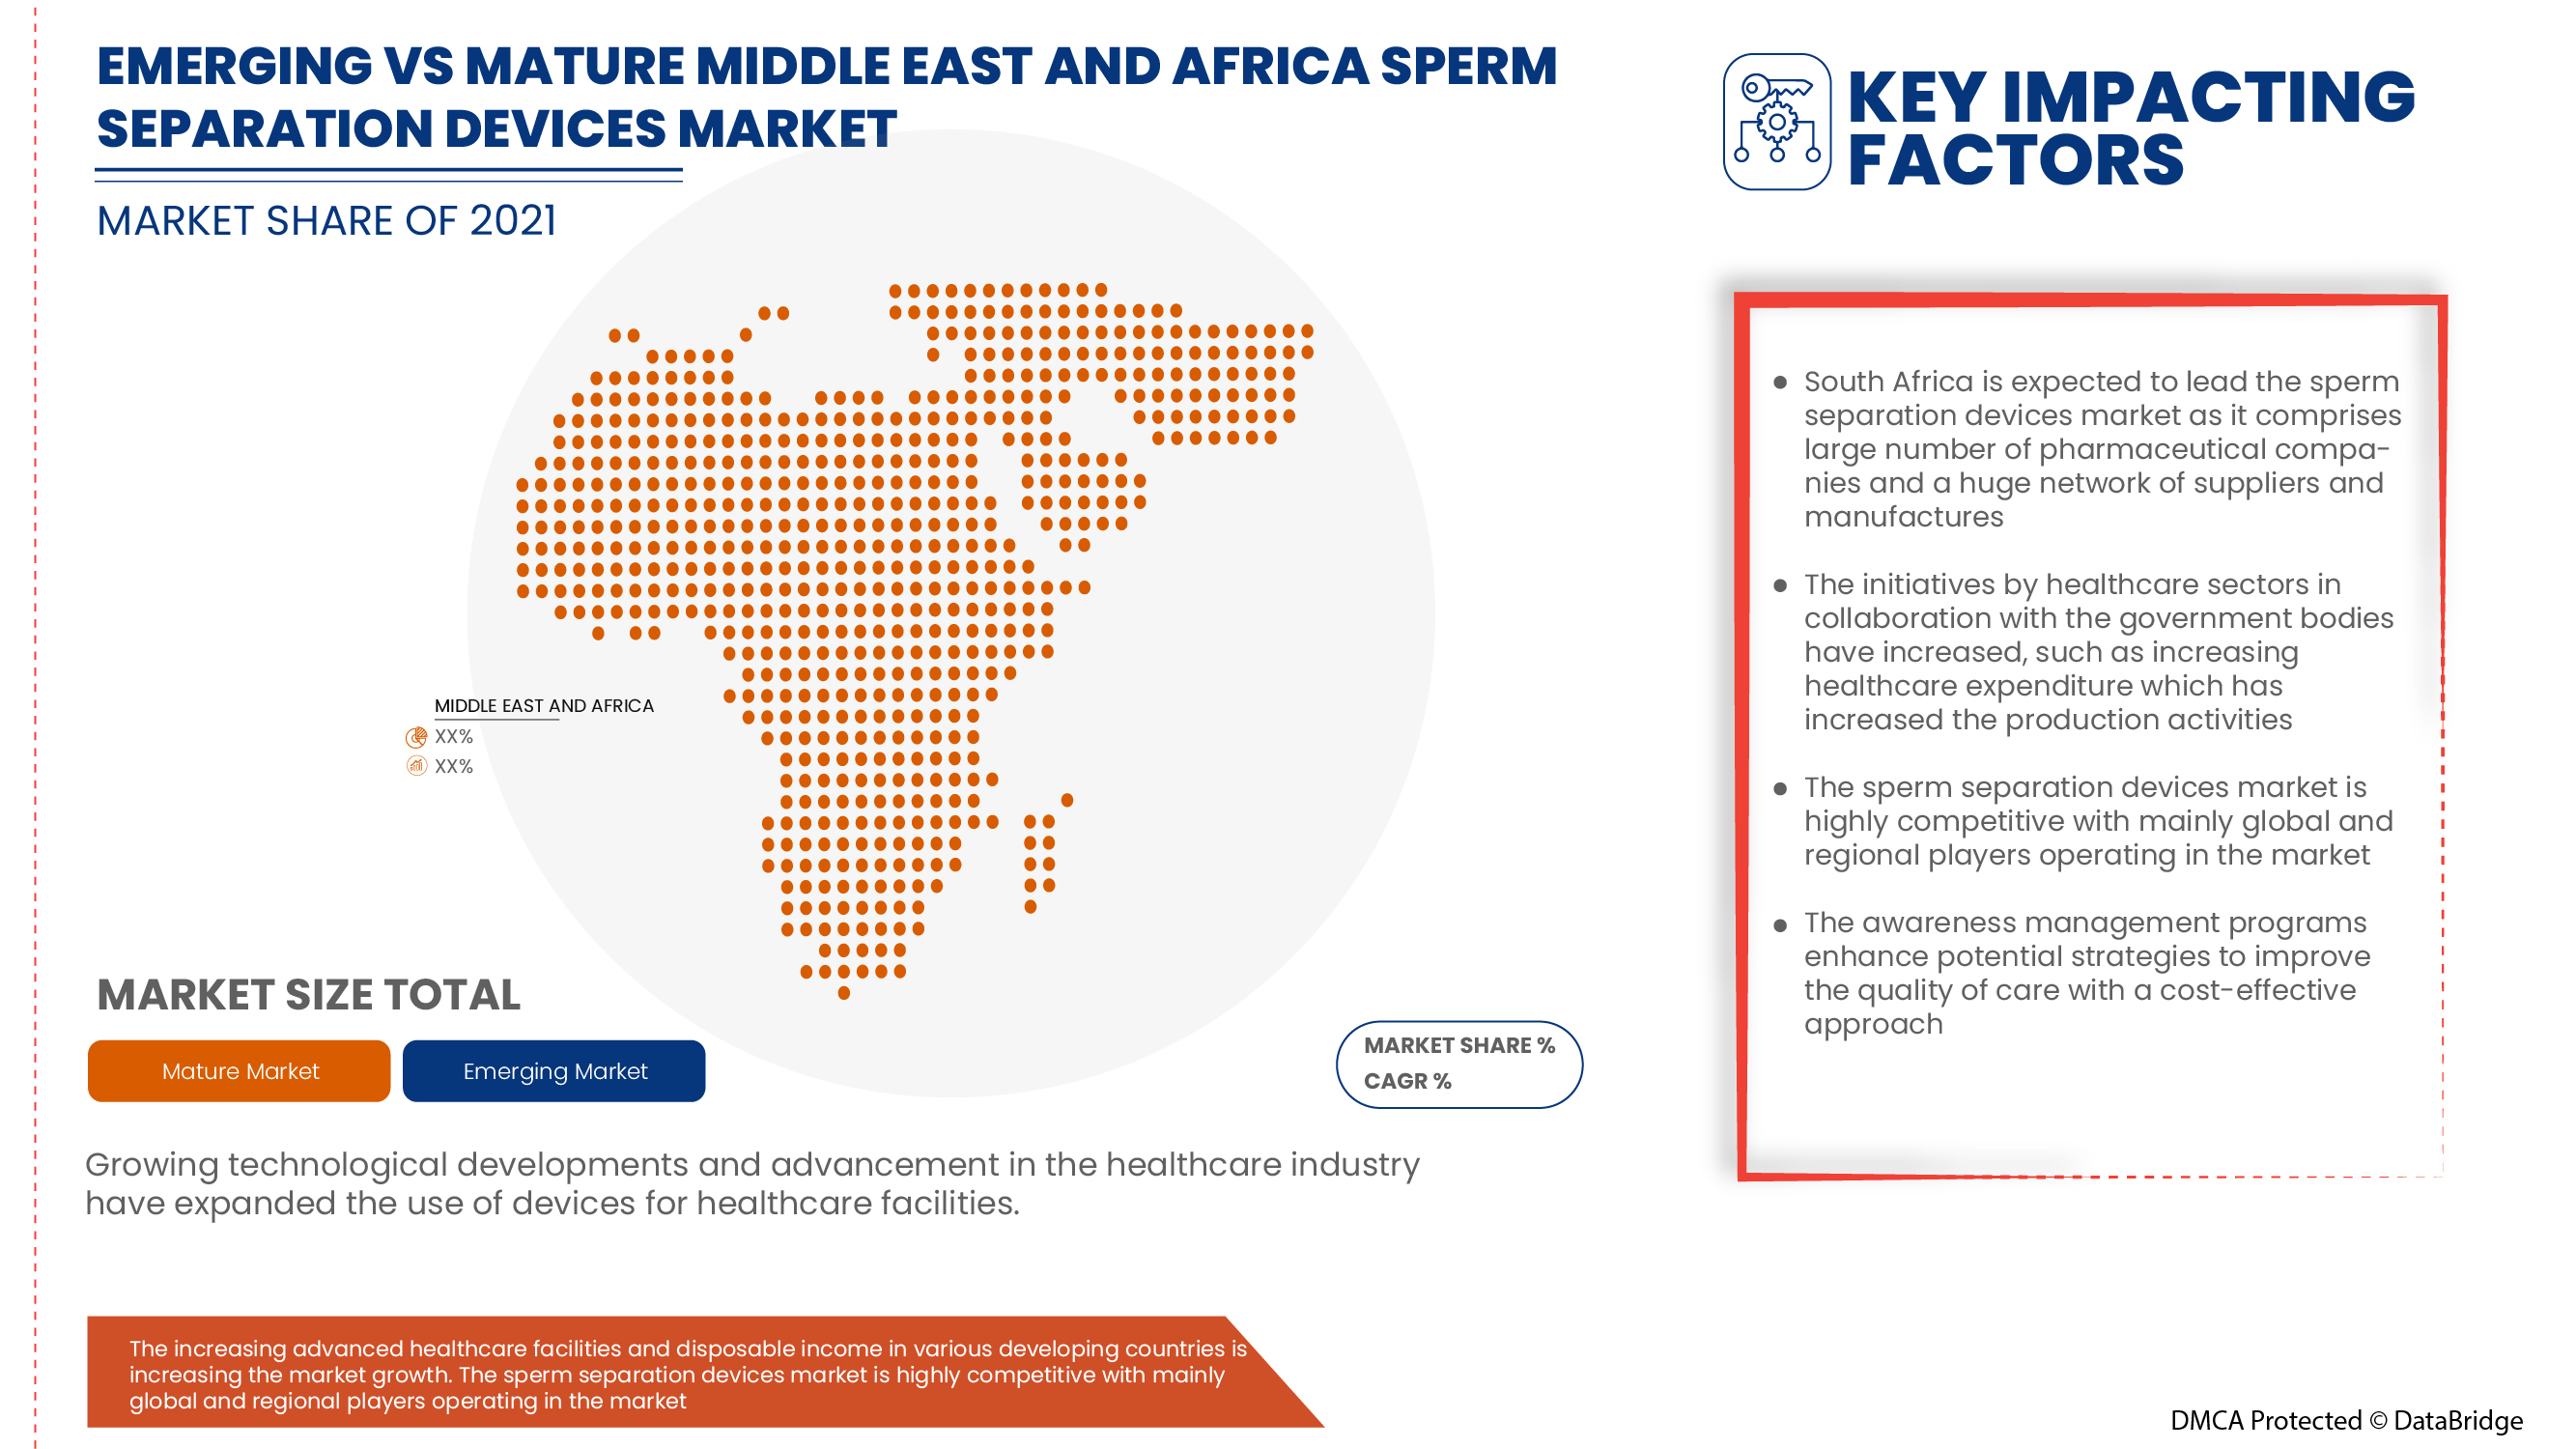 Middle East and Africa Sperm Separation Devices Market